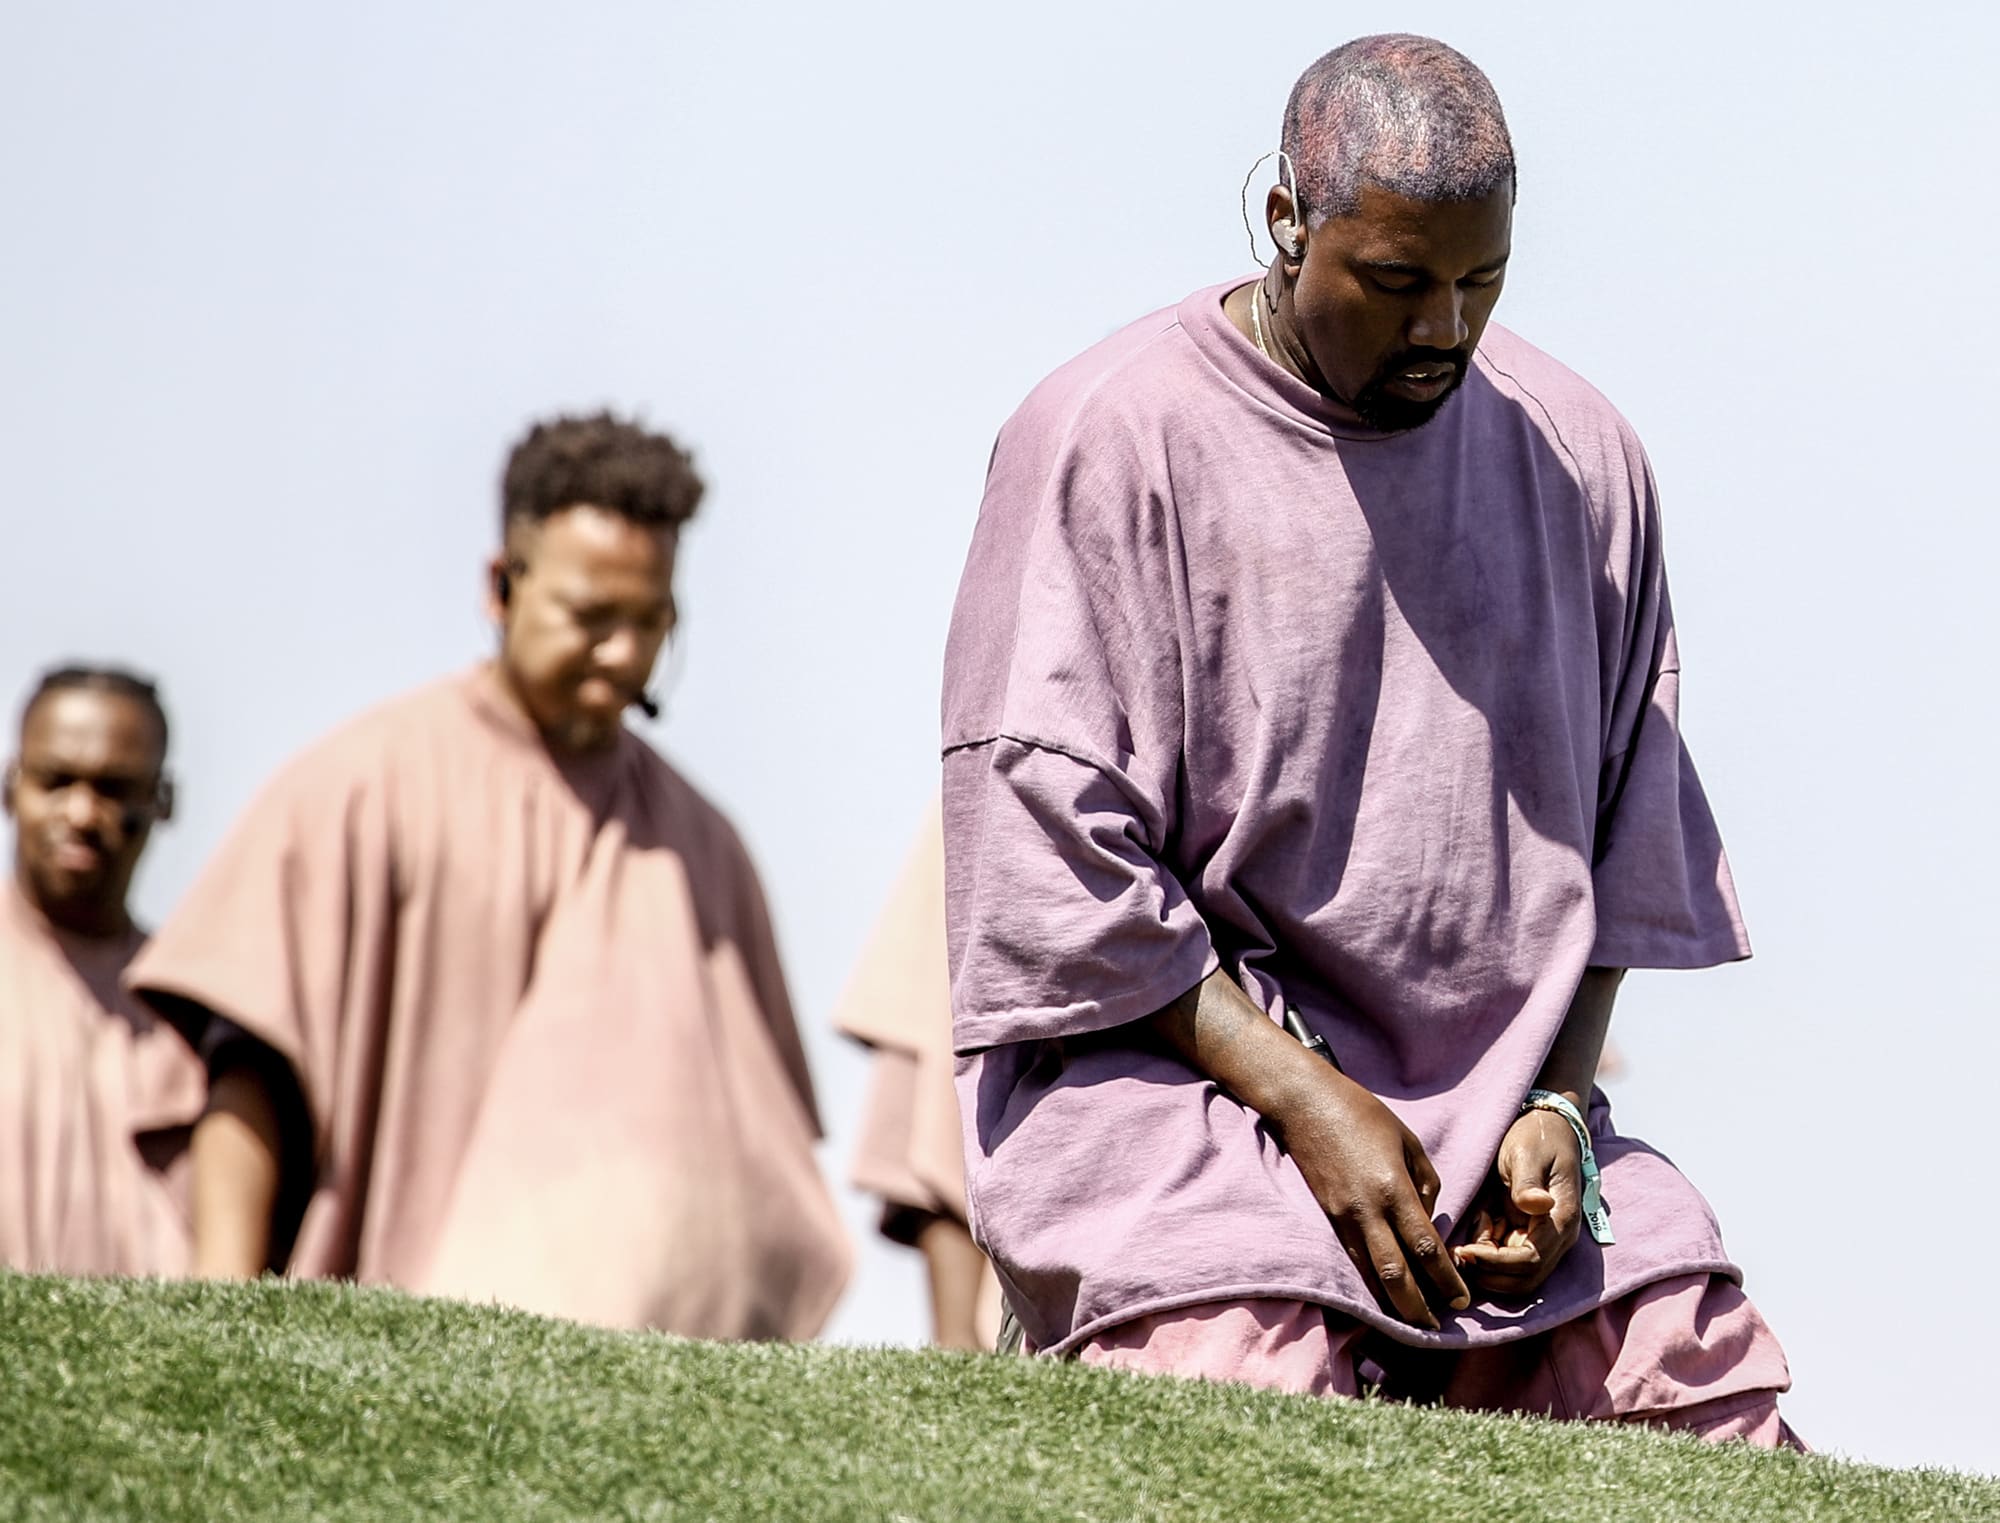 Kanye West Reportedly Wants To Start His Very Own Church And People Call Him The False Prophet That Jesus Warned Us About